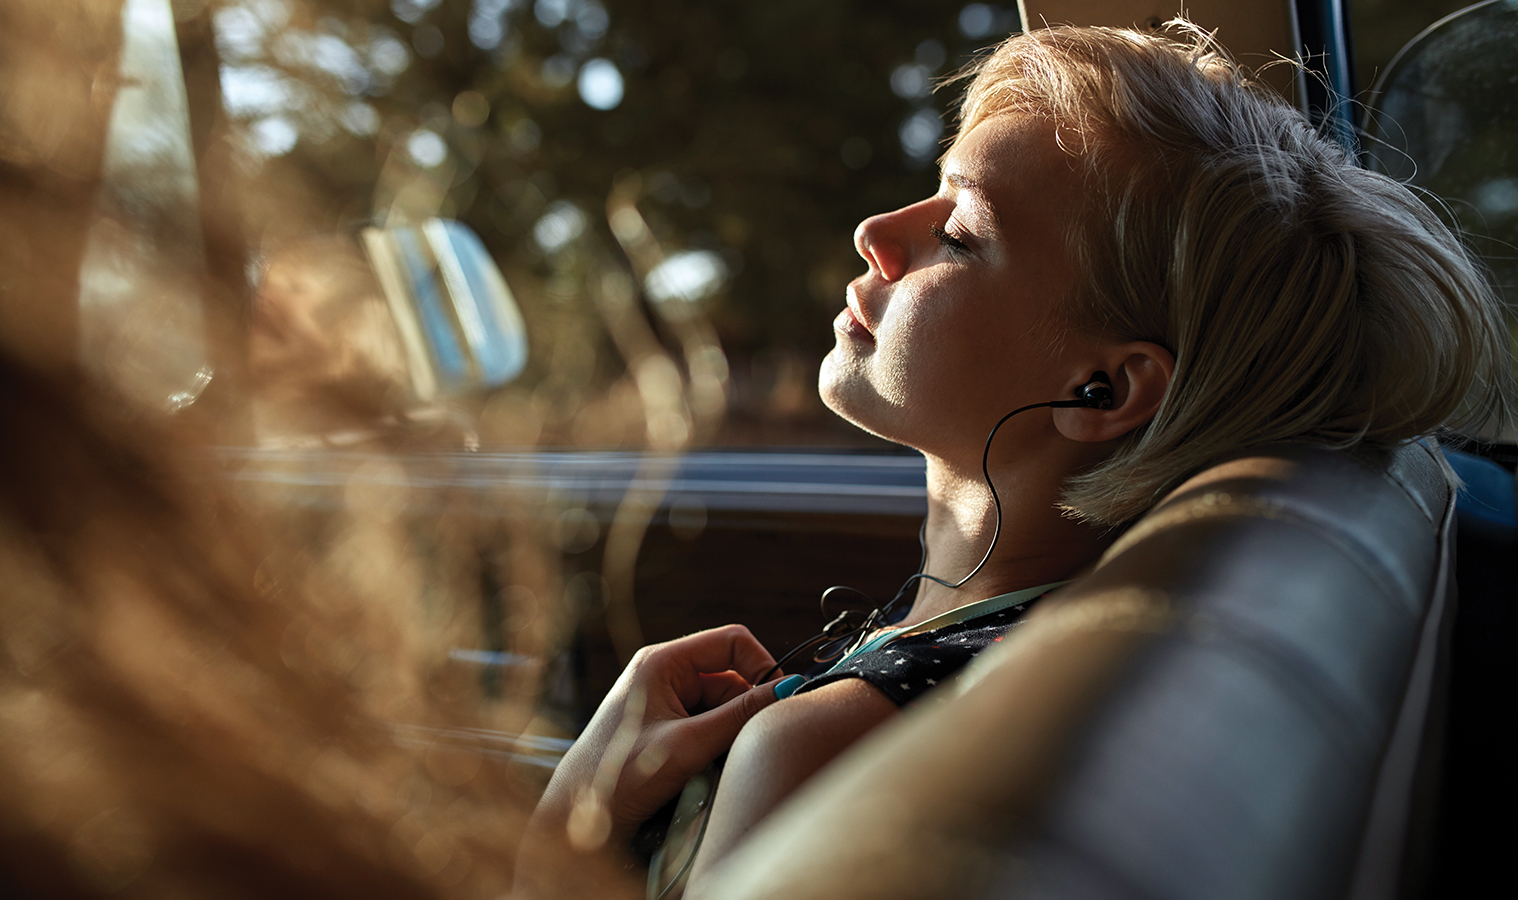 woman with short hair listening to music with her earphones while relaxing as a passenger in a car